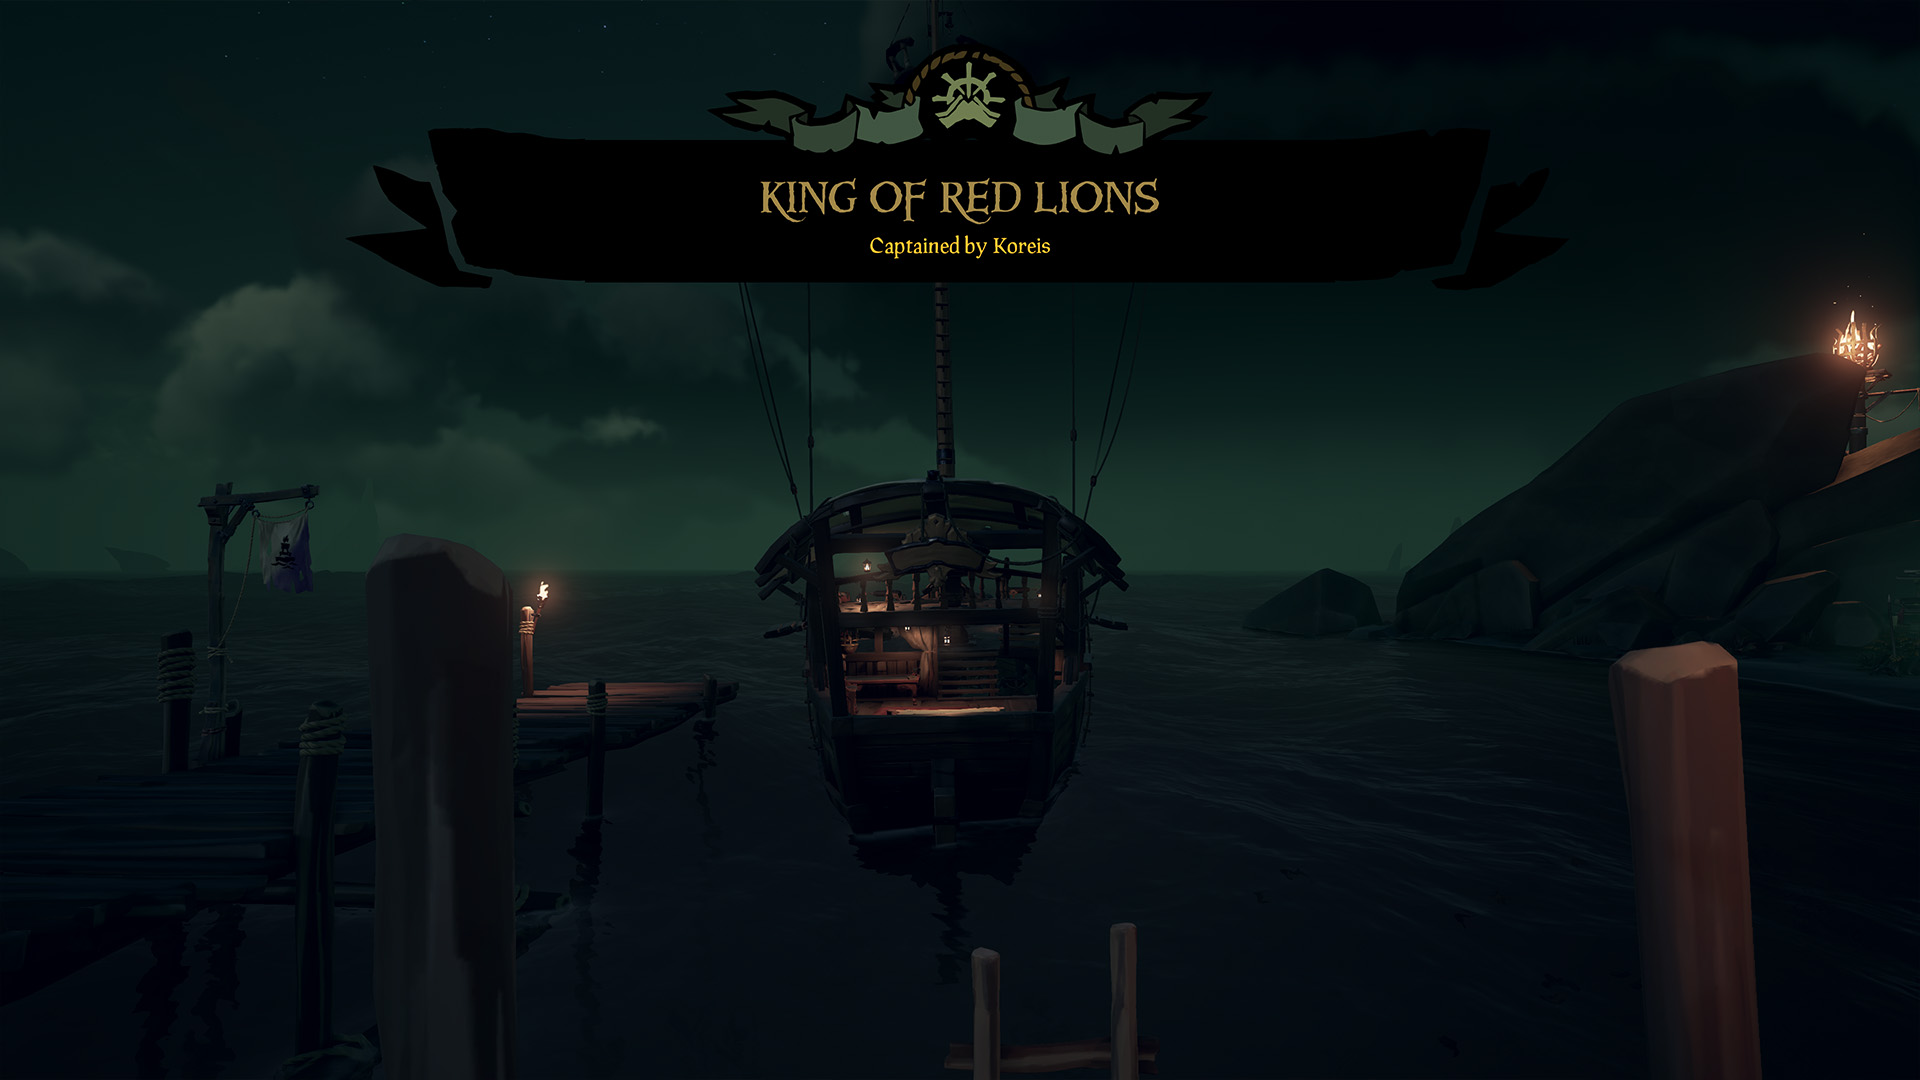 At the rear of a ship is a crest bearing the name King of Red Lions in Sea of Thieves